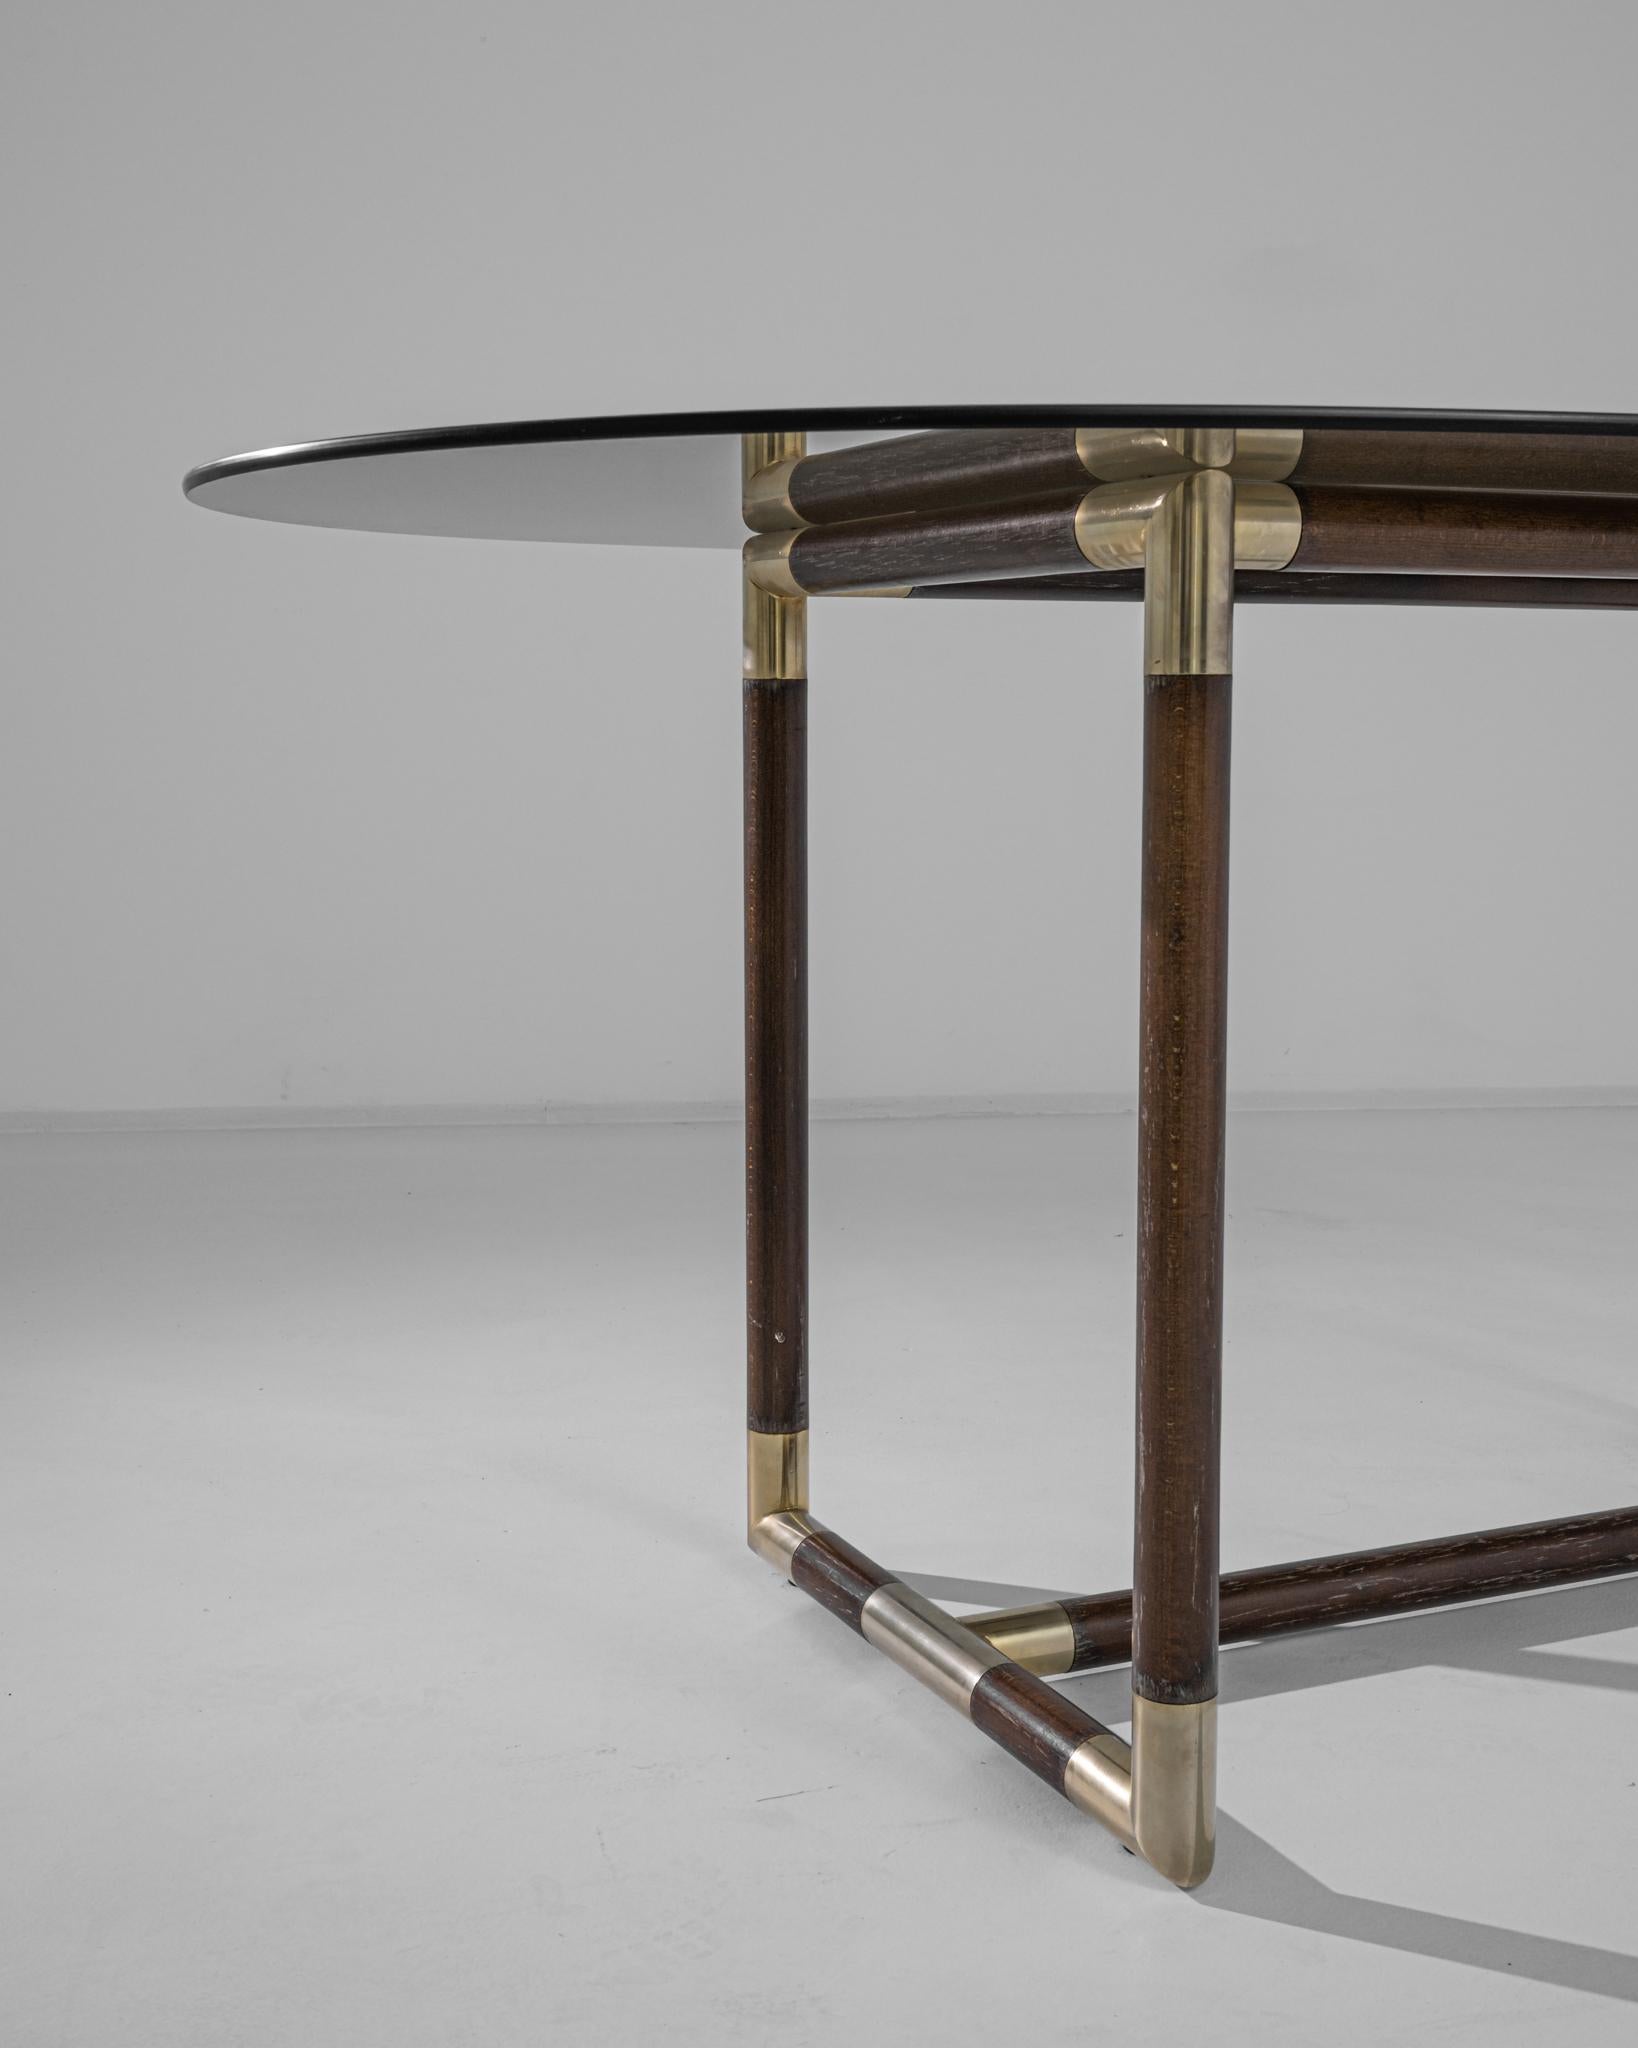 A coffee table made in France circa 1980. The tubular wooden base decorated with gilded tips constitutes a three-dimensional rectangular silhouette, juxtaposing against the oval shape of the smoked glass table top. Exuding an Art Deco aesthetic,